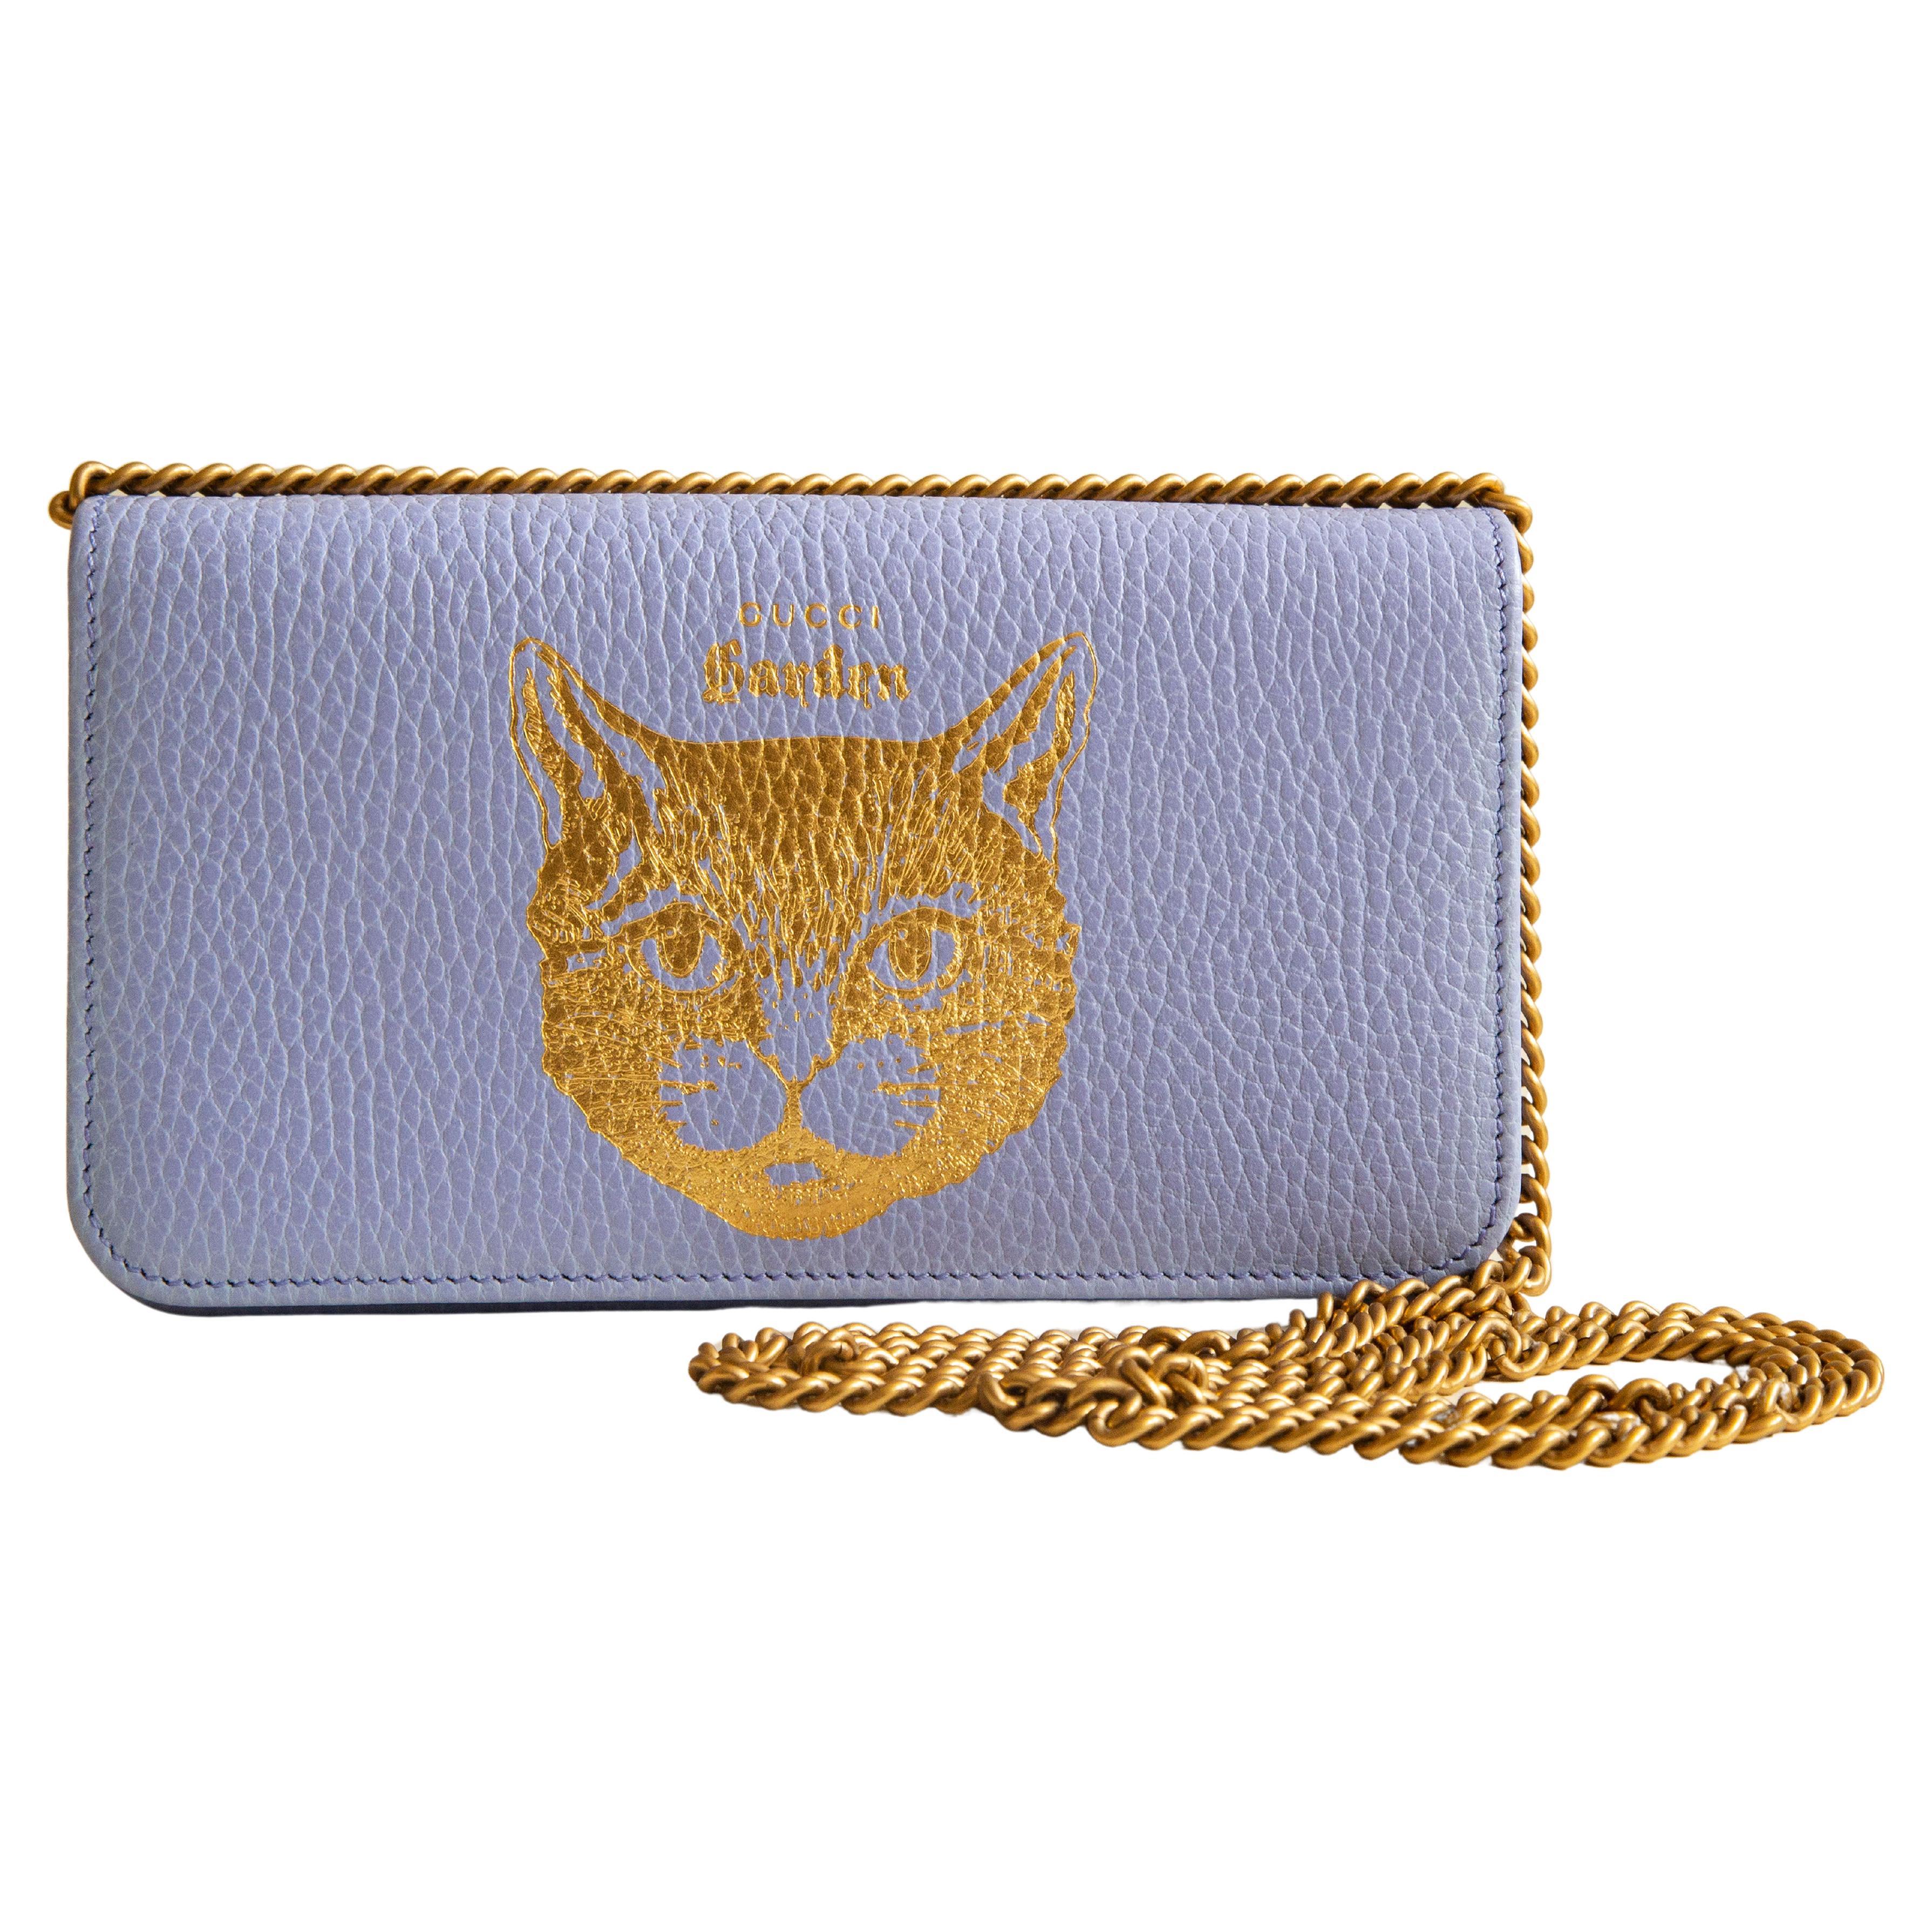 Gucci Garden Limited Edition Cat Chain Pouch Crossbody Bag in Light Lila